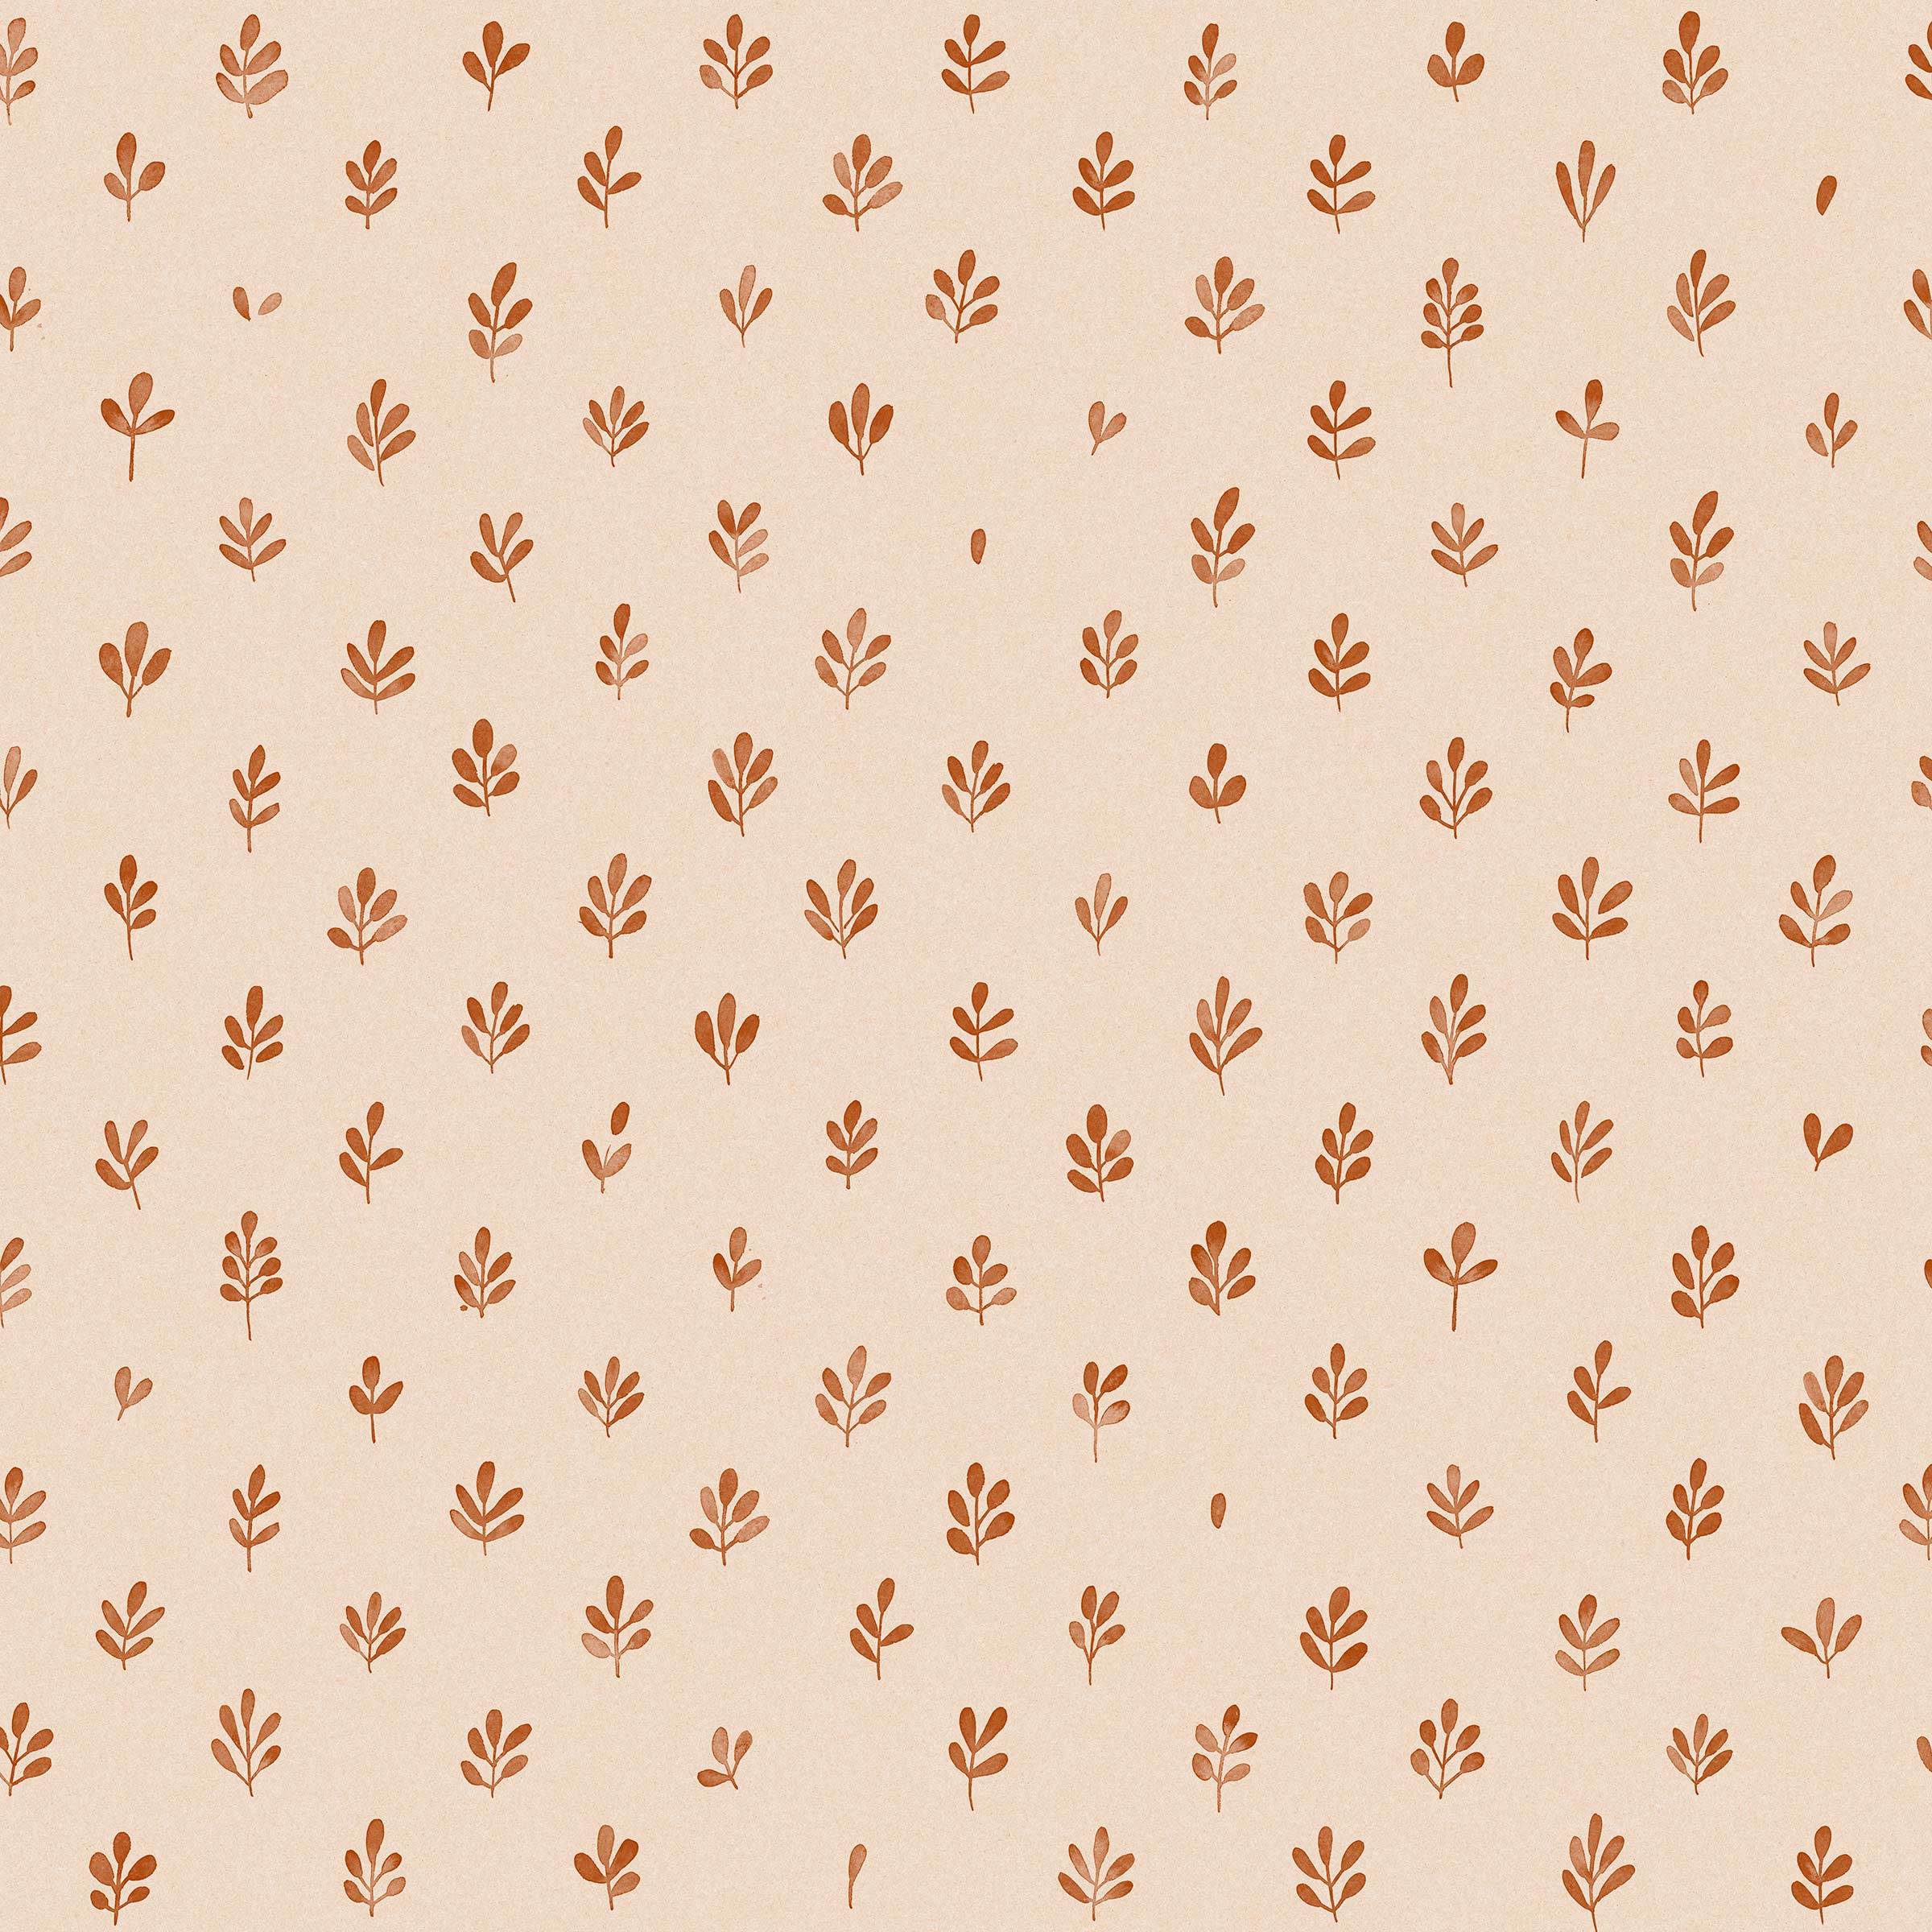 Detail of wallpaper in a repeating leaf print in burnt orange on a cream field.